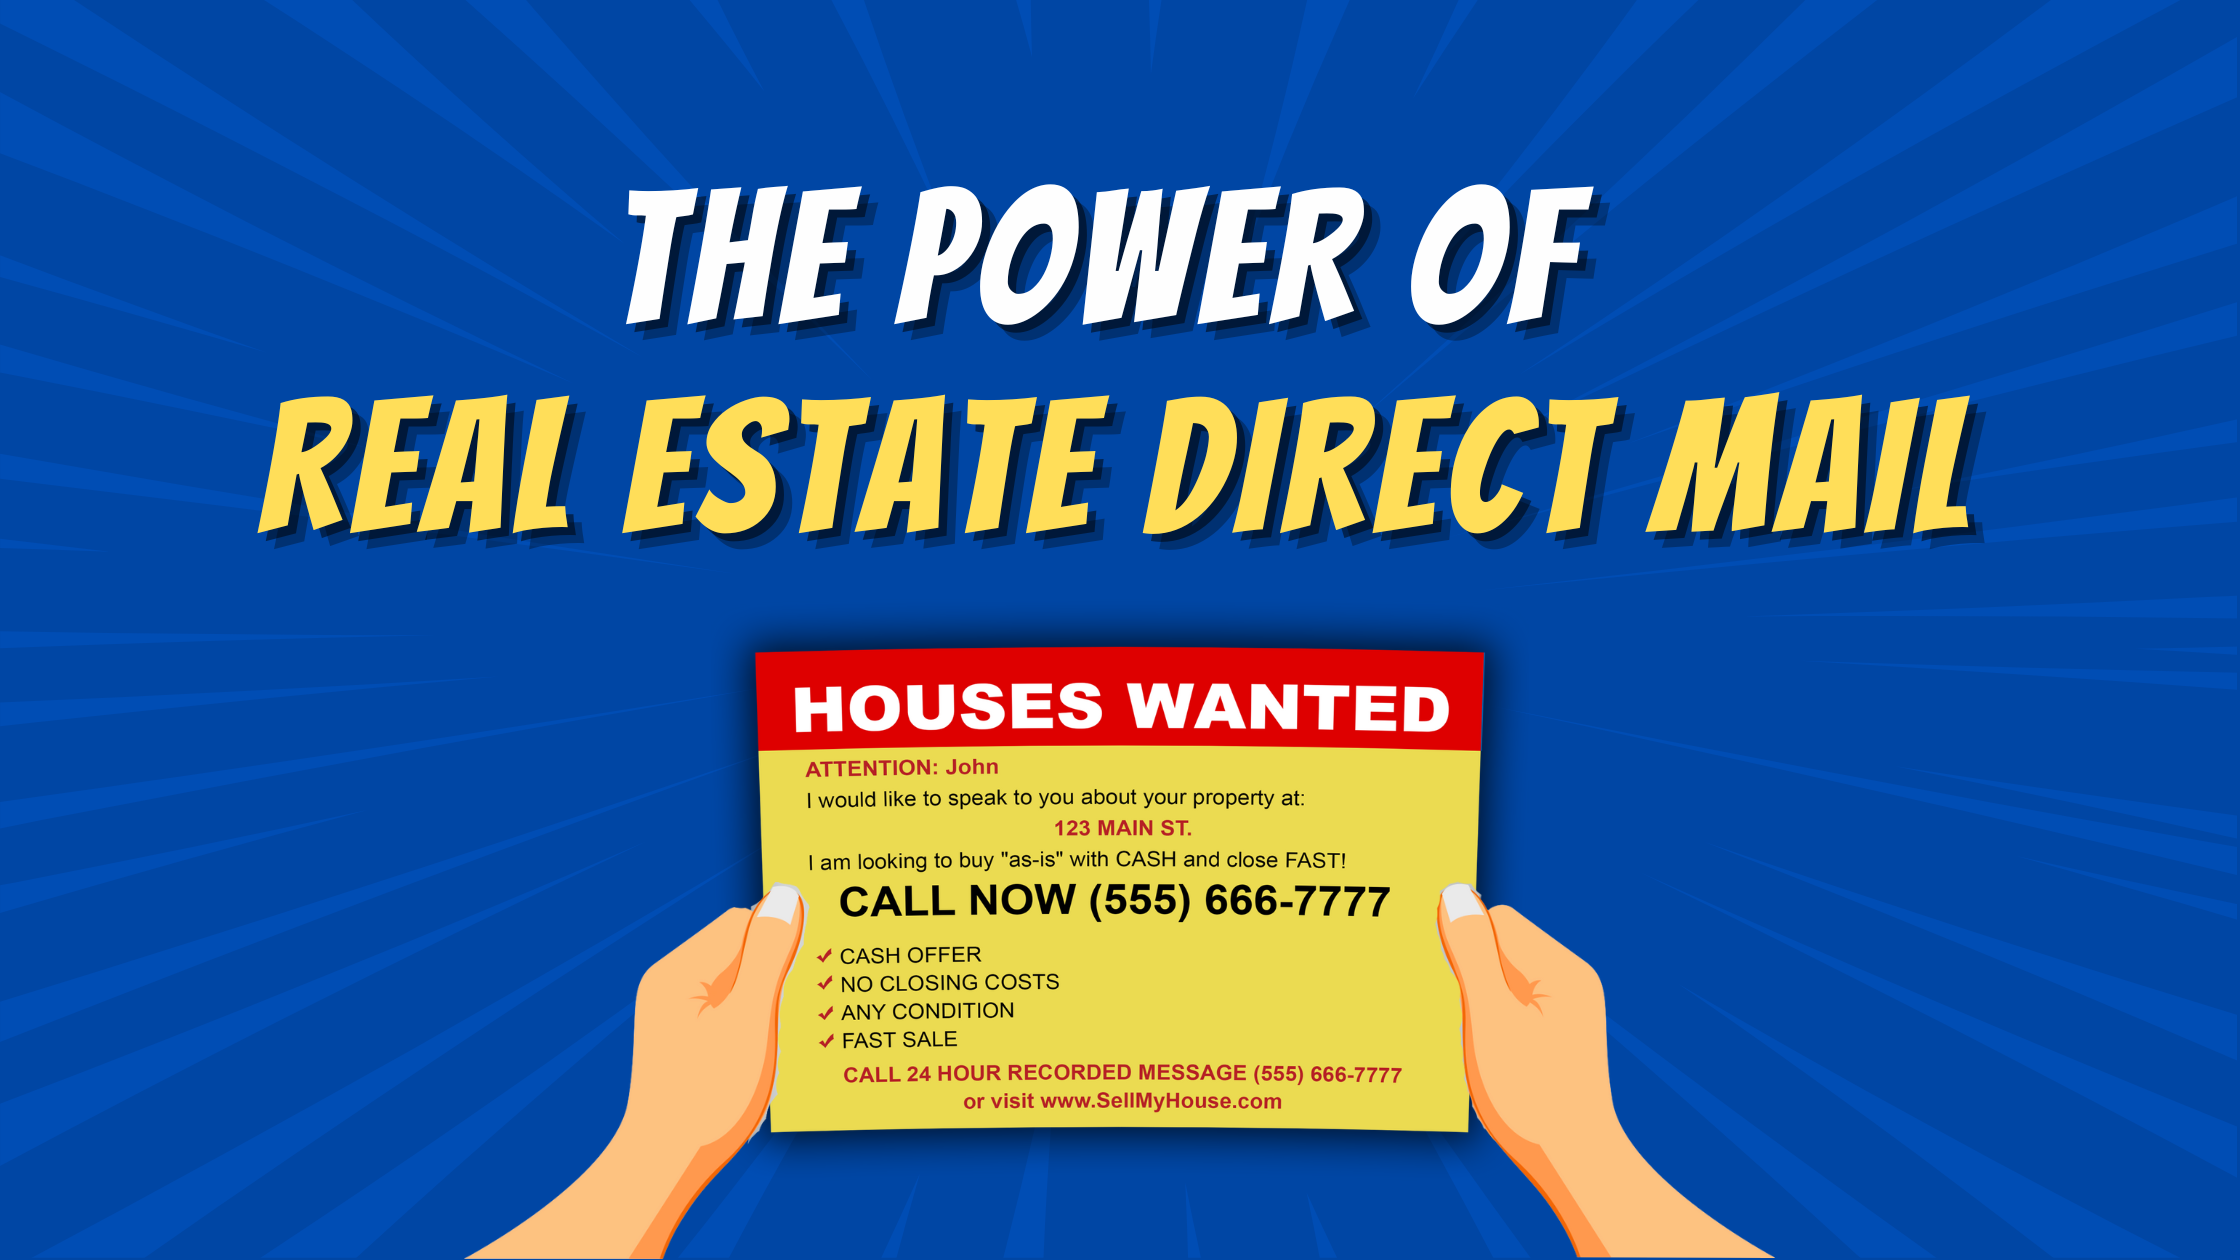 The Power of Real Estate Direct Mail